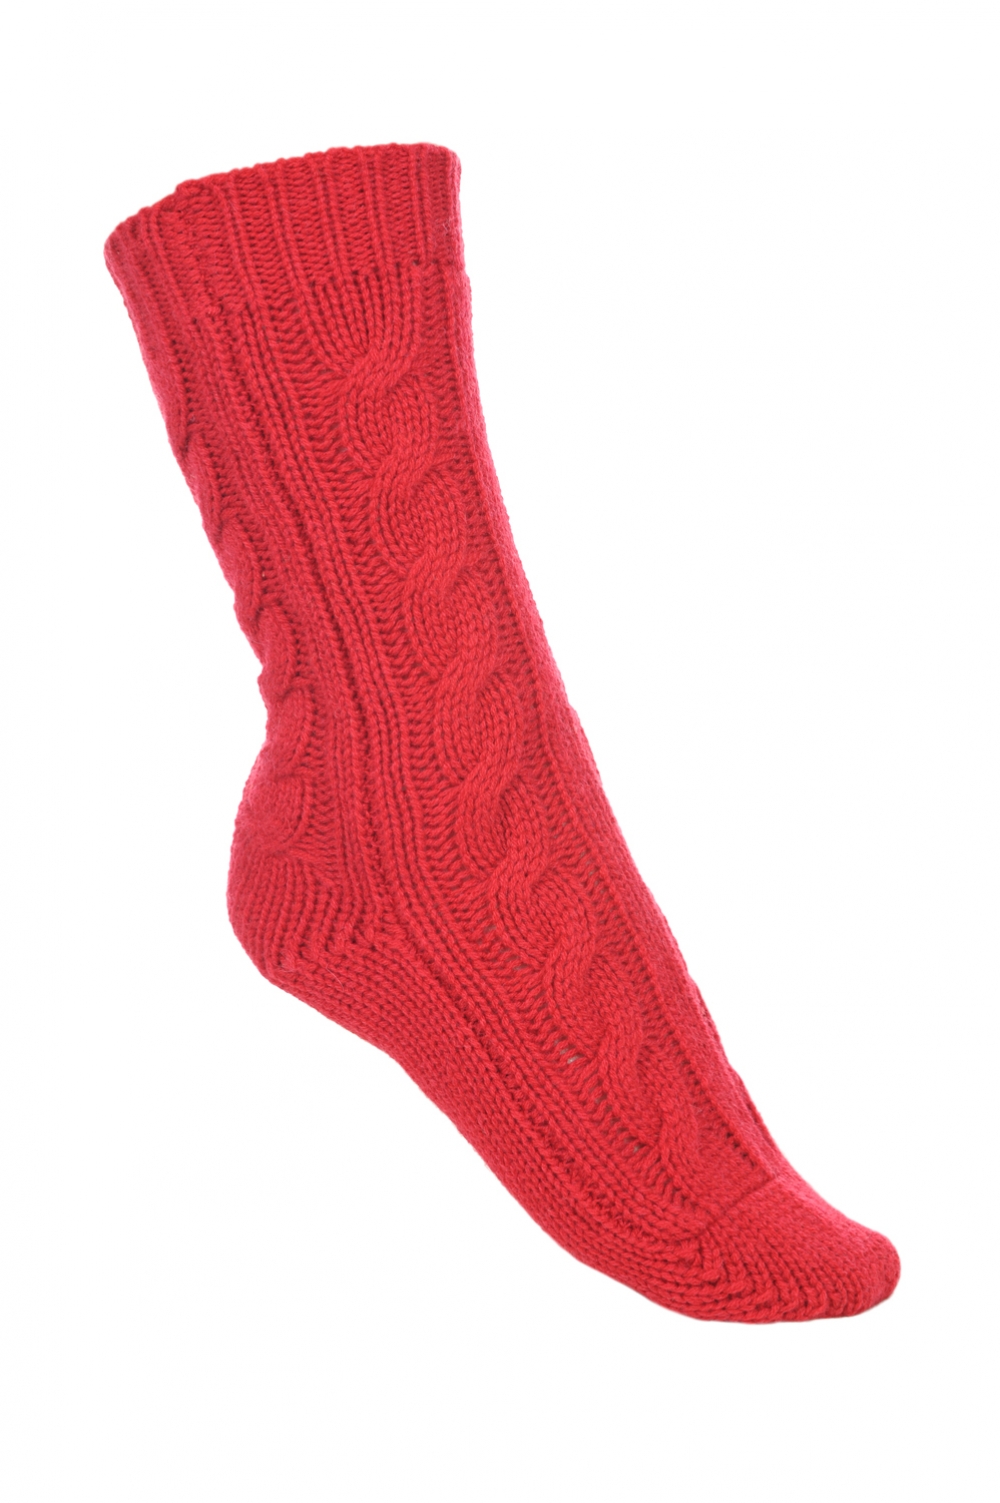 Cashmere accessories cocooning pedibus blood red 37 41